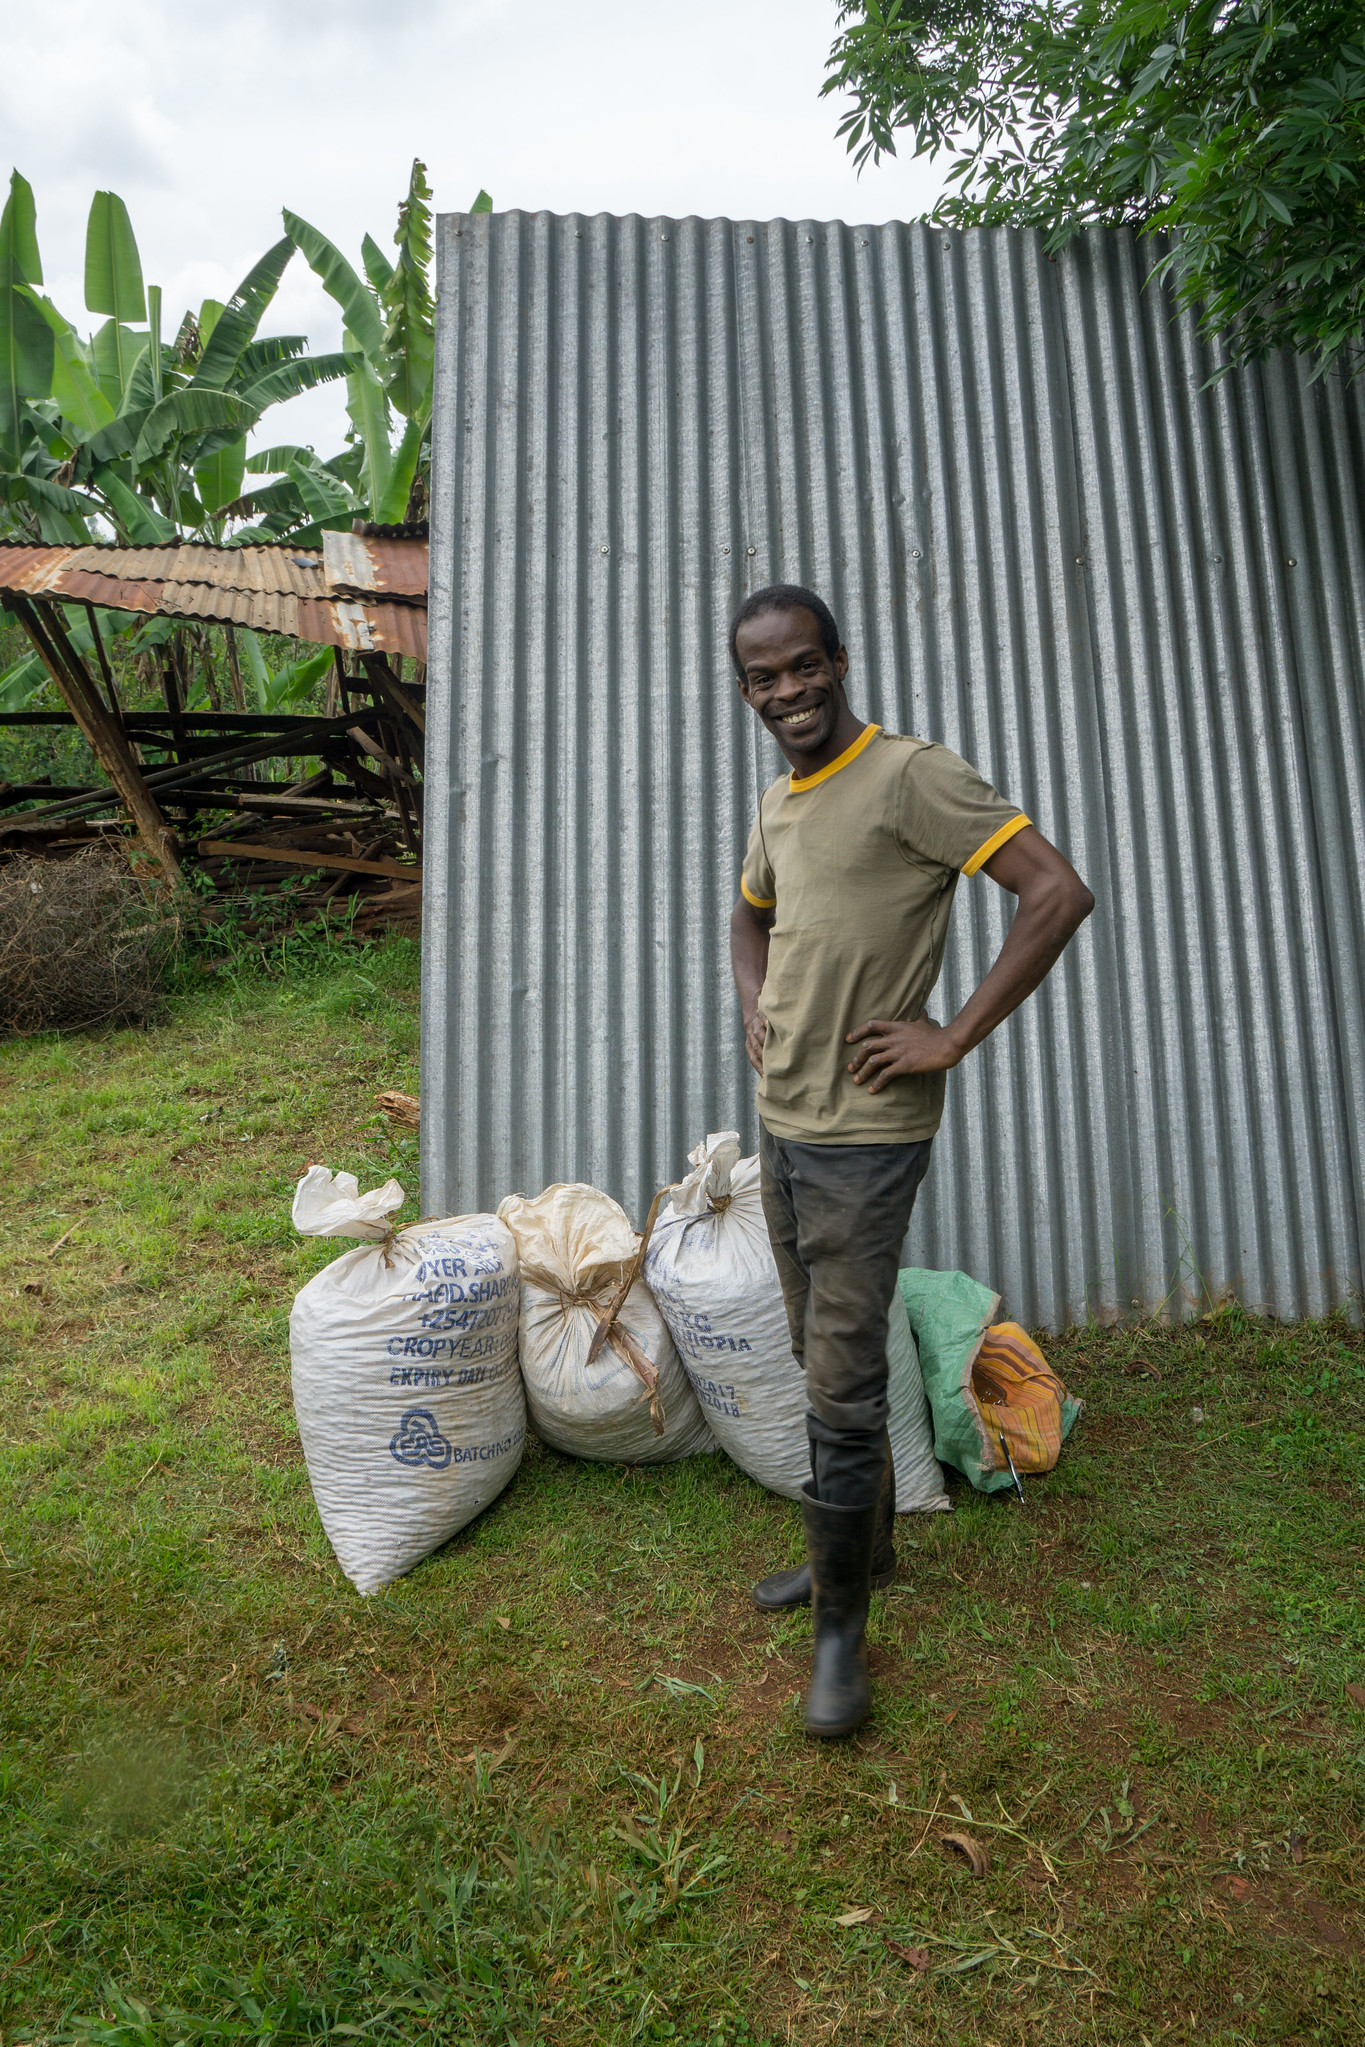 Uche here is experimenting with organic coffee production and permaculture, which isn't seen anywhere in Kenya. We hope to be able to buy from him in the future.